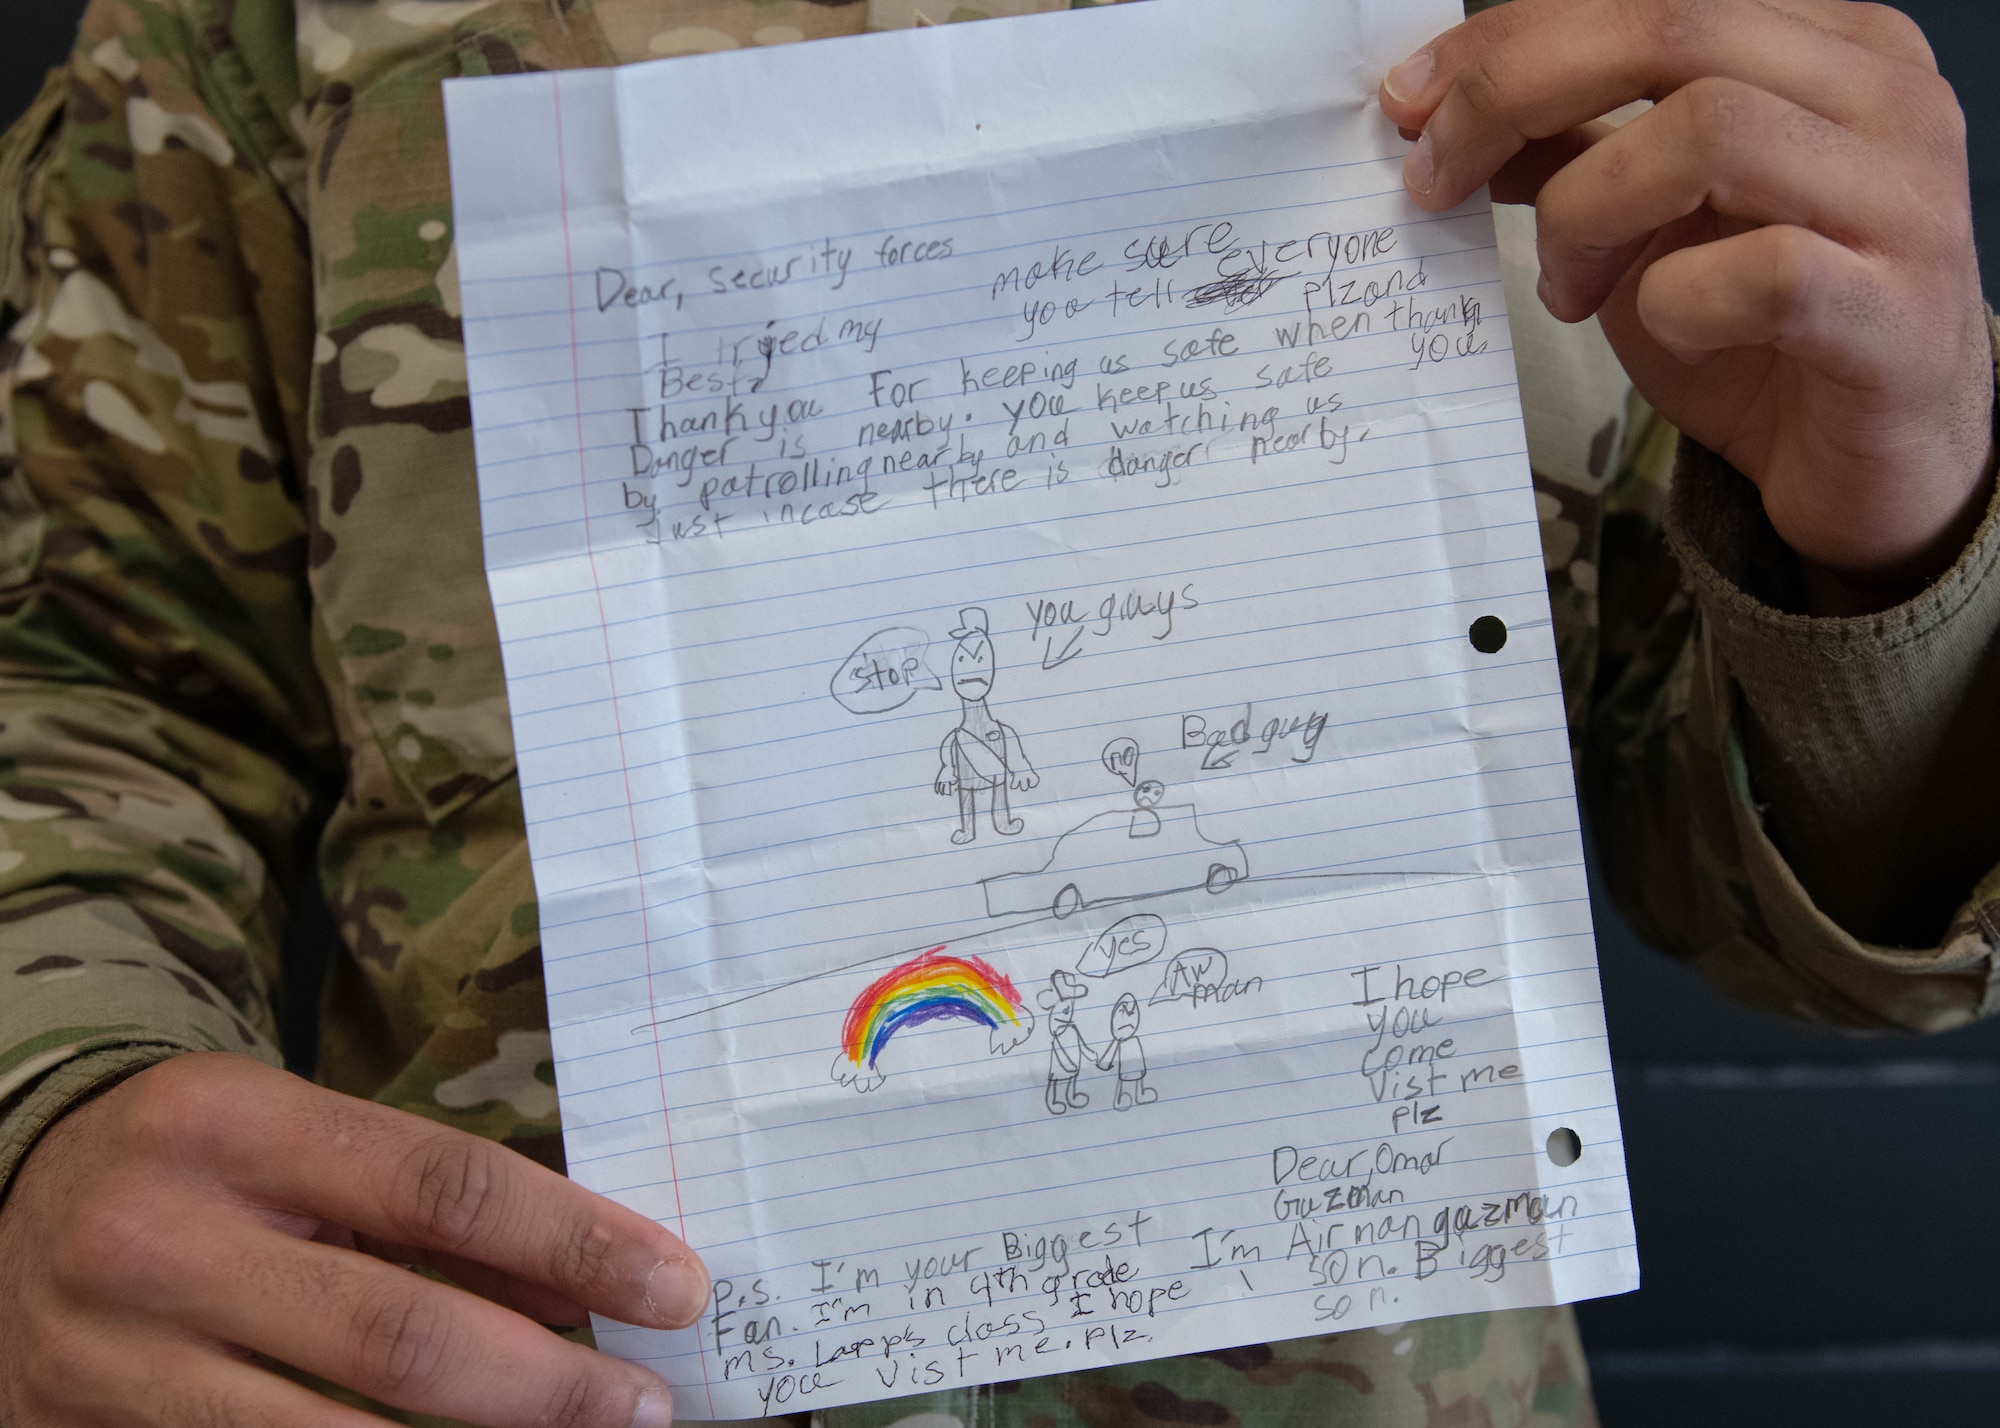 U.S. Air Force Airman 1st Class Dylan Wohlford, an installation entry controller assigned to the 509th Security Forces Squadron, holds the letter he received from Omar, an elementary school student at Whiteman Air Force Base, Missouri, on Feb. 26, 2021. Omar personally delivered the letter to Wohlford while he was on duty at Spirit Gate, to show his appreciation for the Air Force's defenders. (U.S. Air Force photo by Airman 1st Class Devan Halstead)